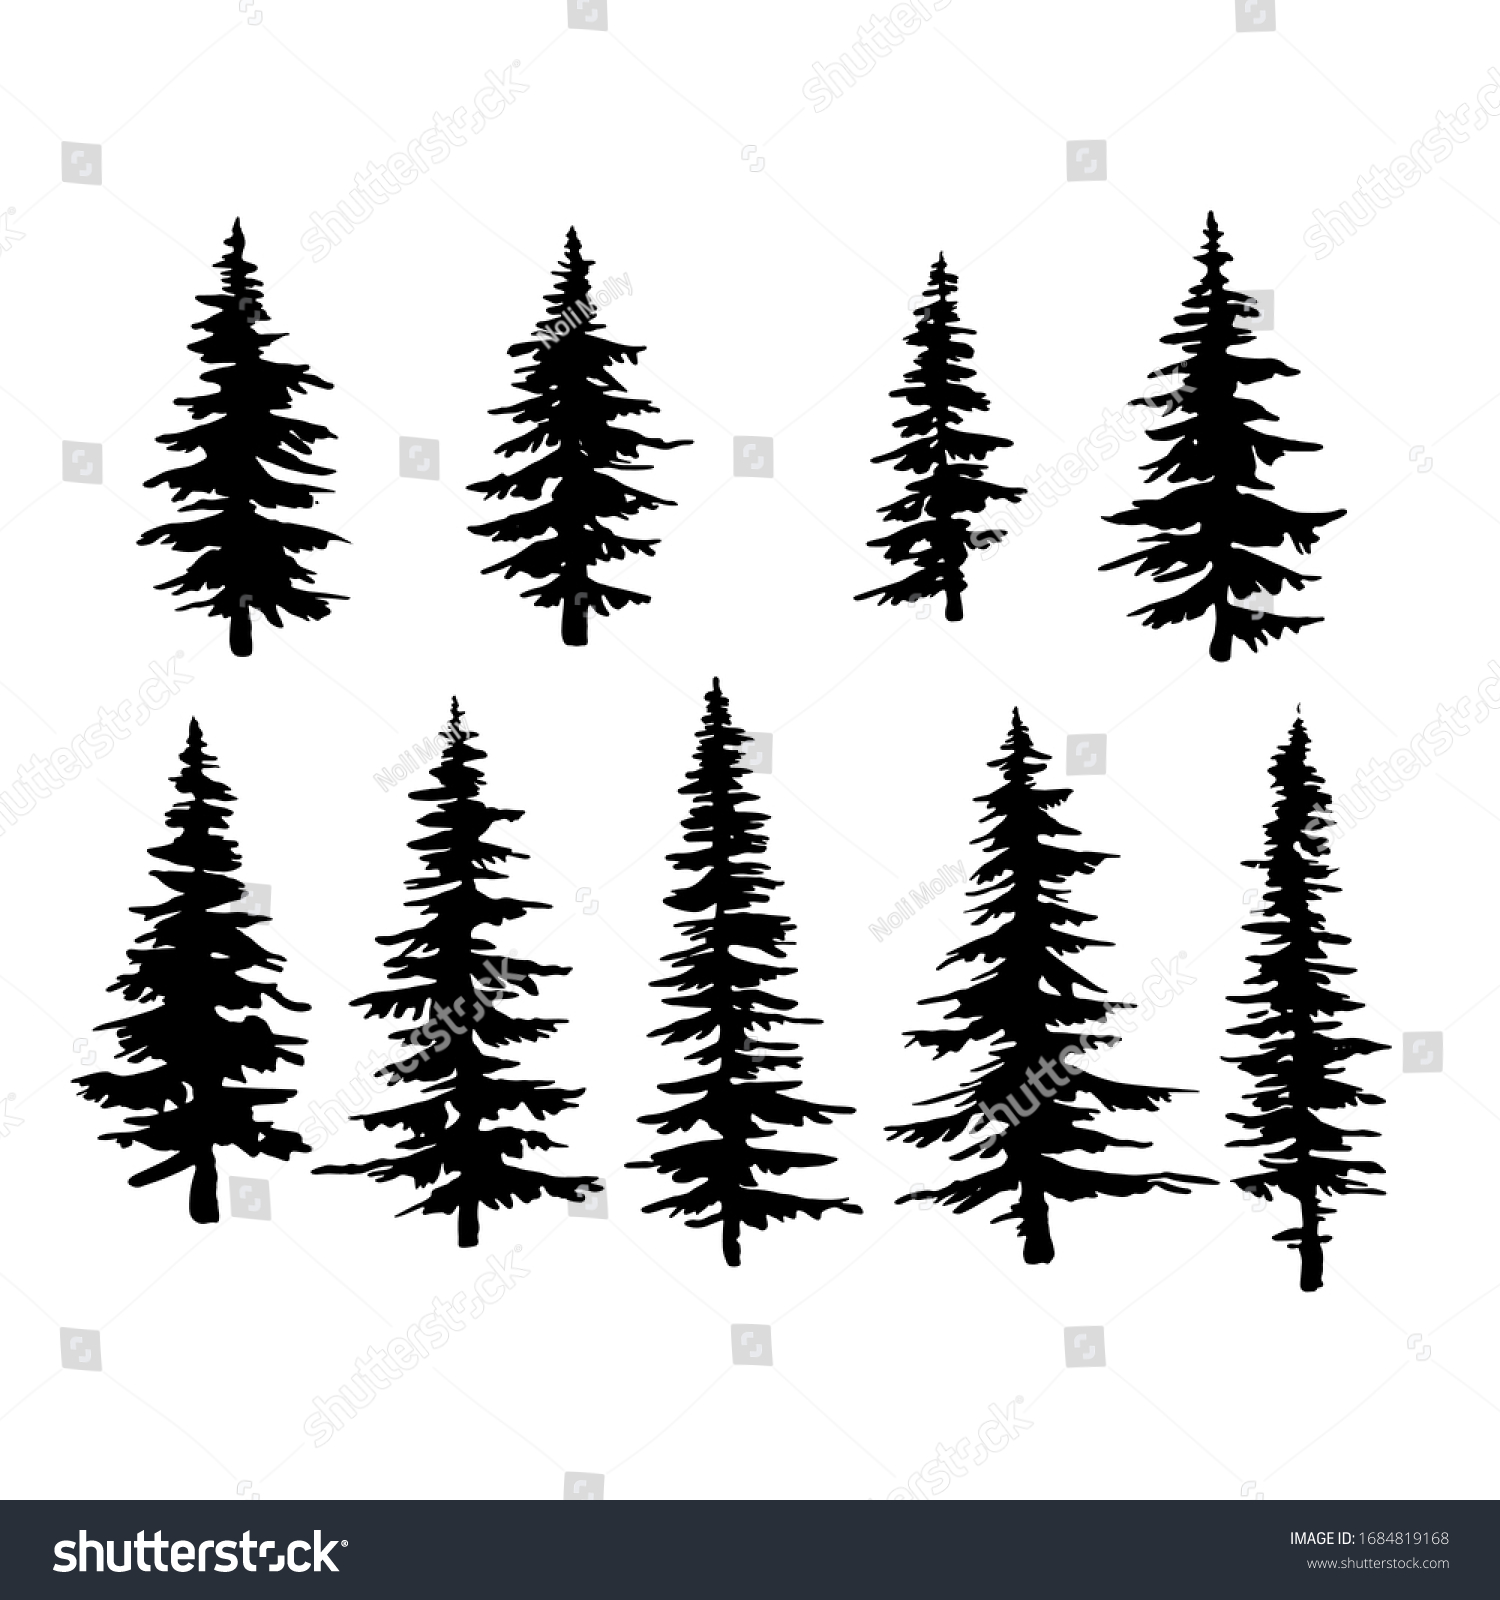 vector spruce tree, ink plant sketch, hand drawing, black silhouette  #1684819168